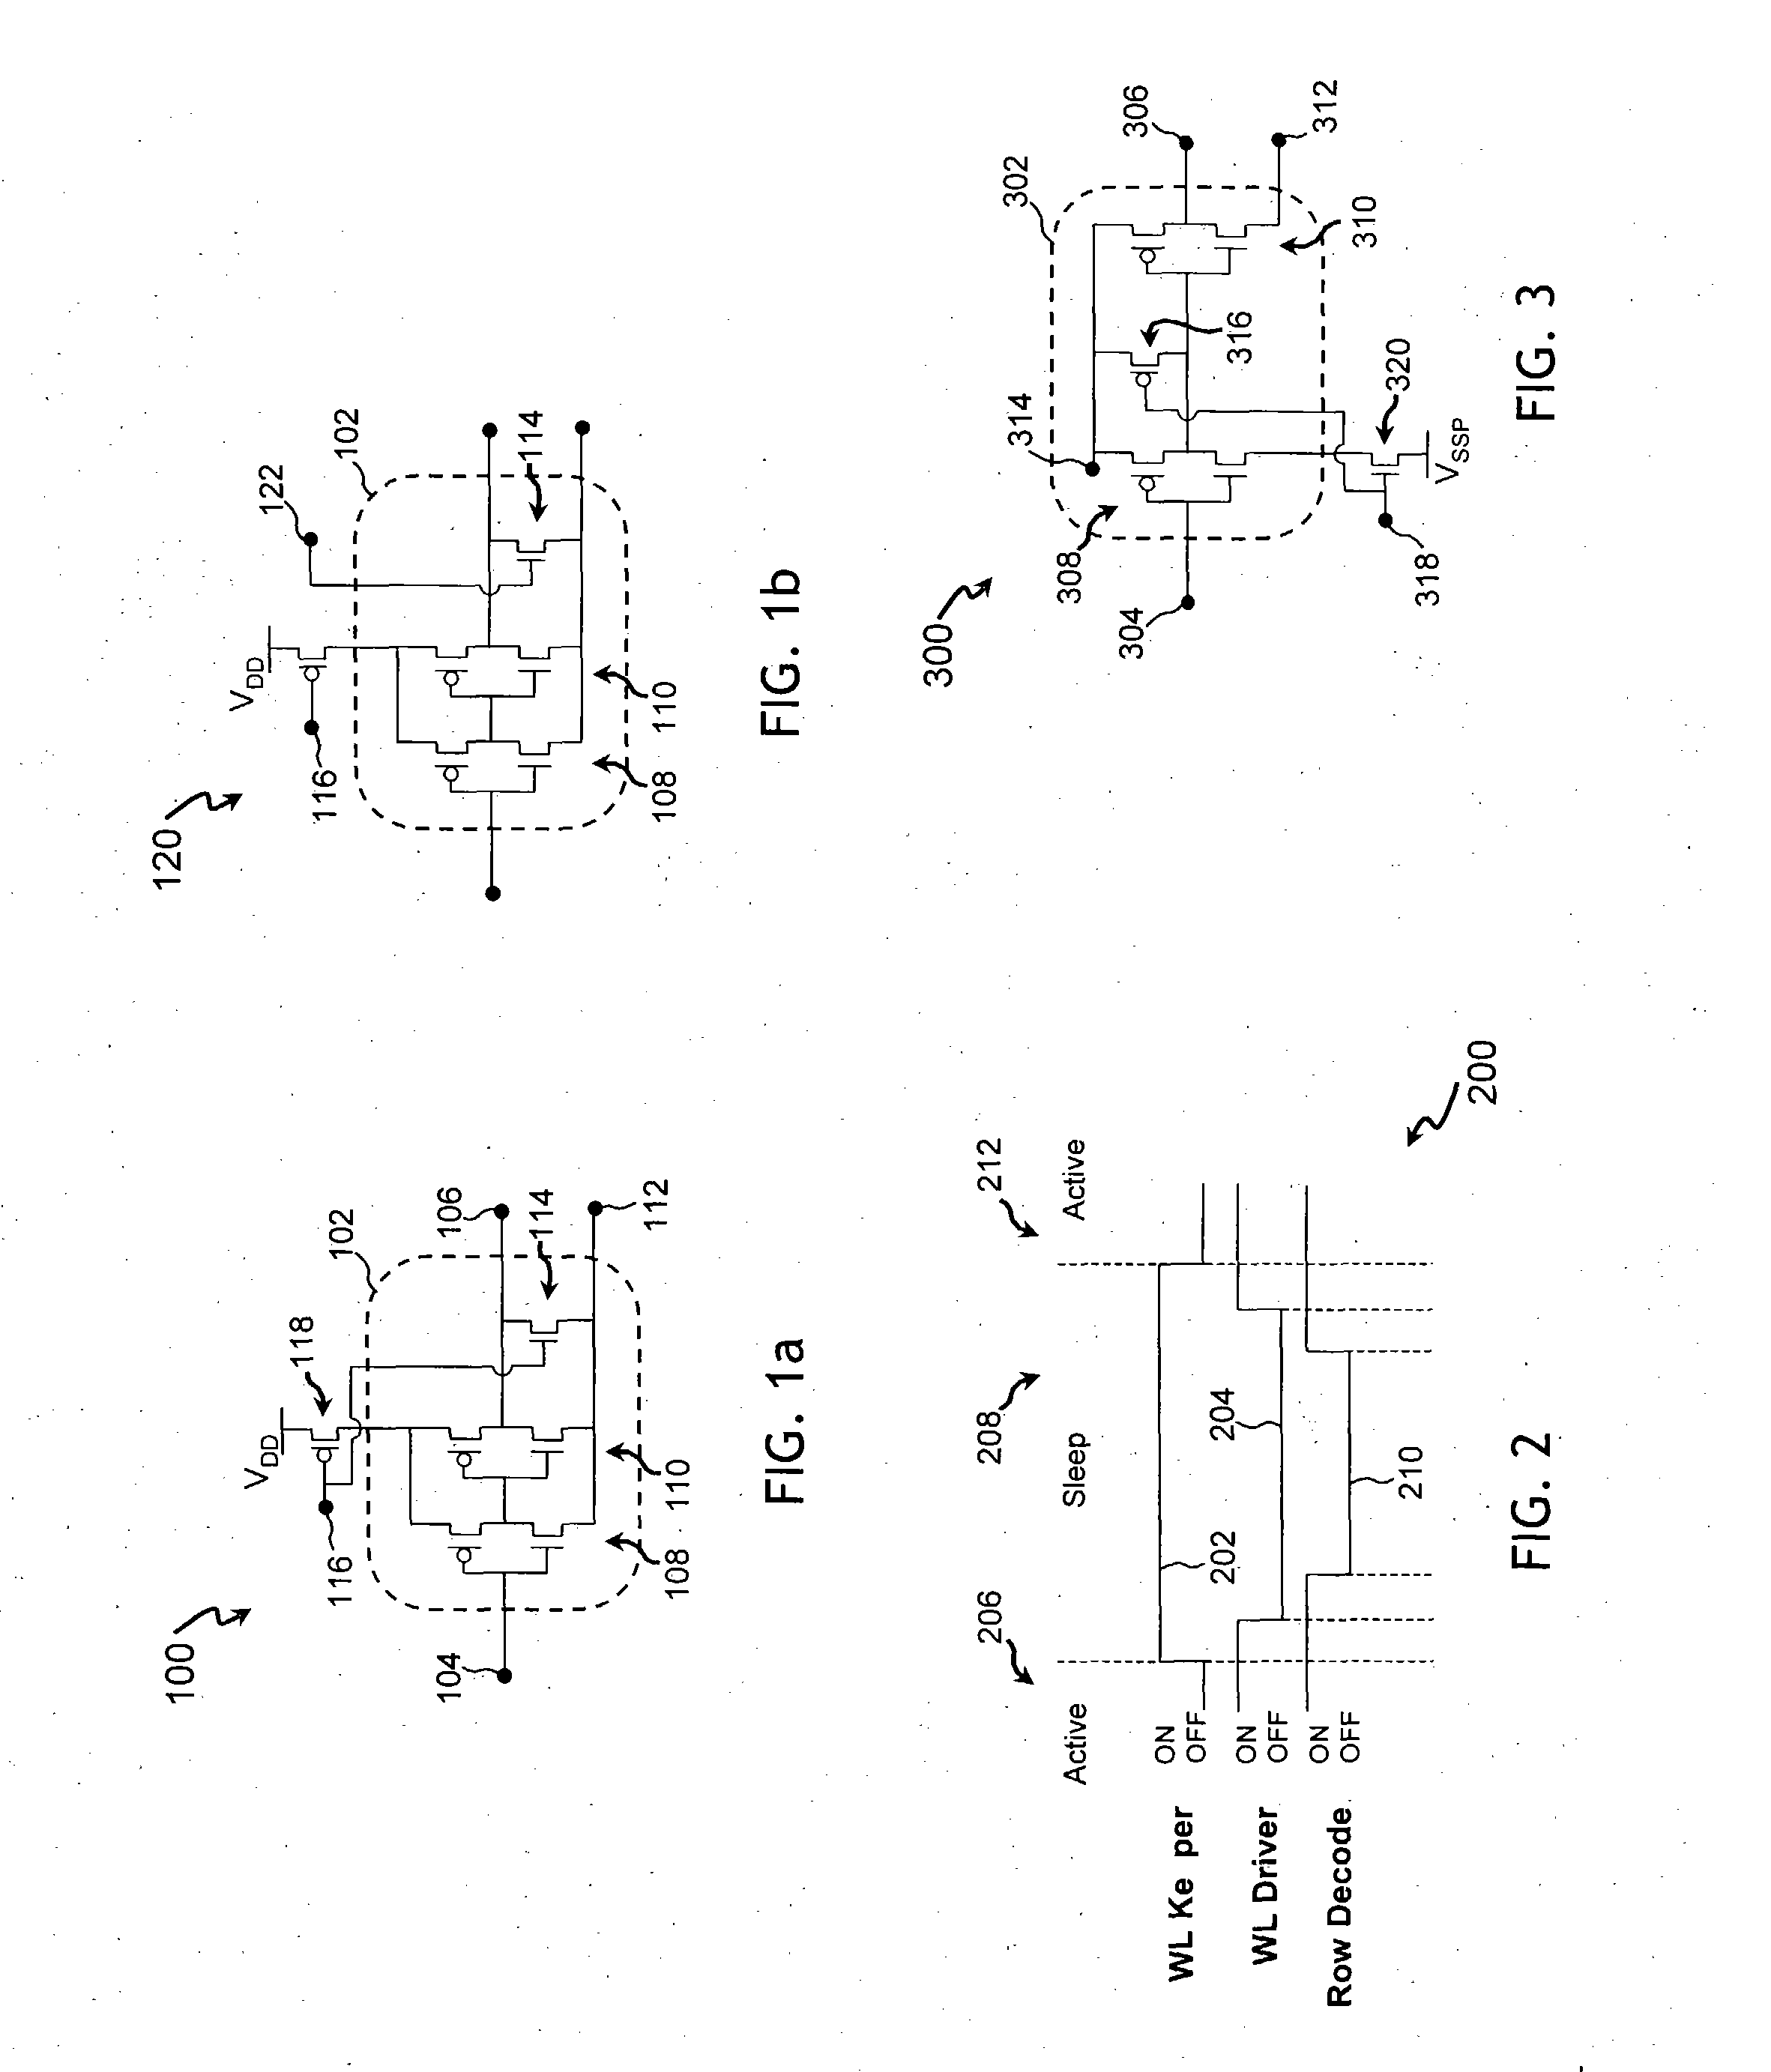 System for reducing row periphery power consumption in memory devices